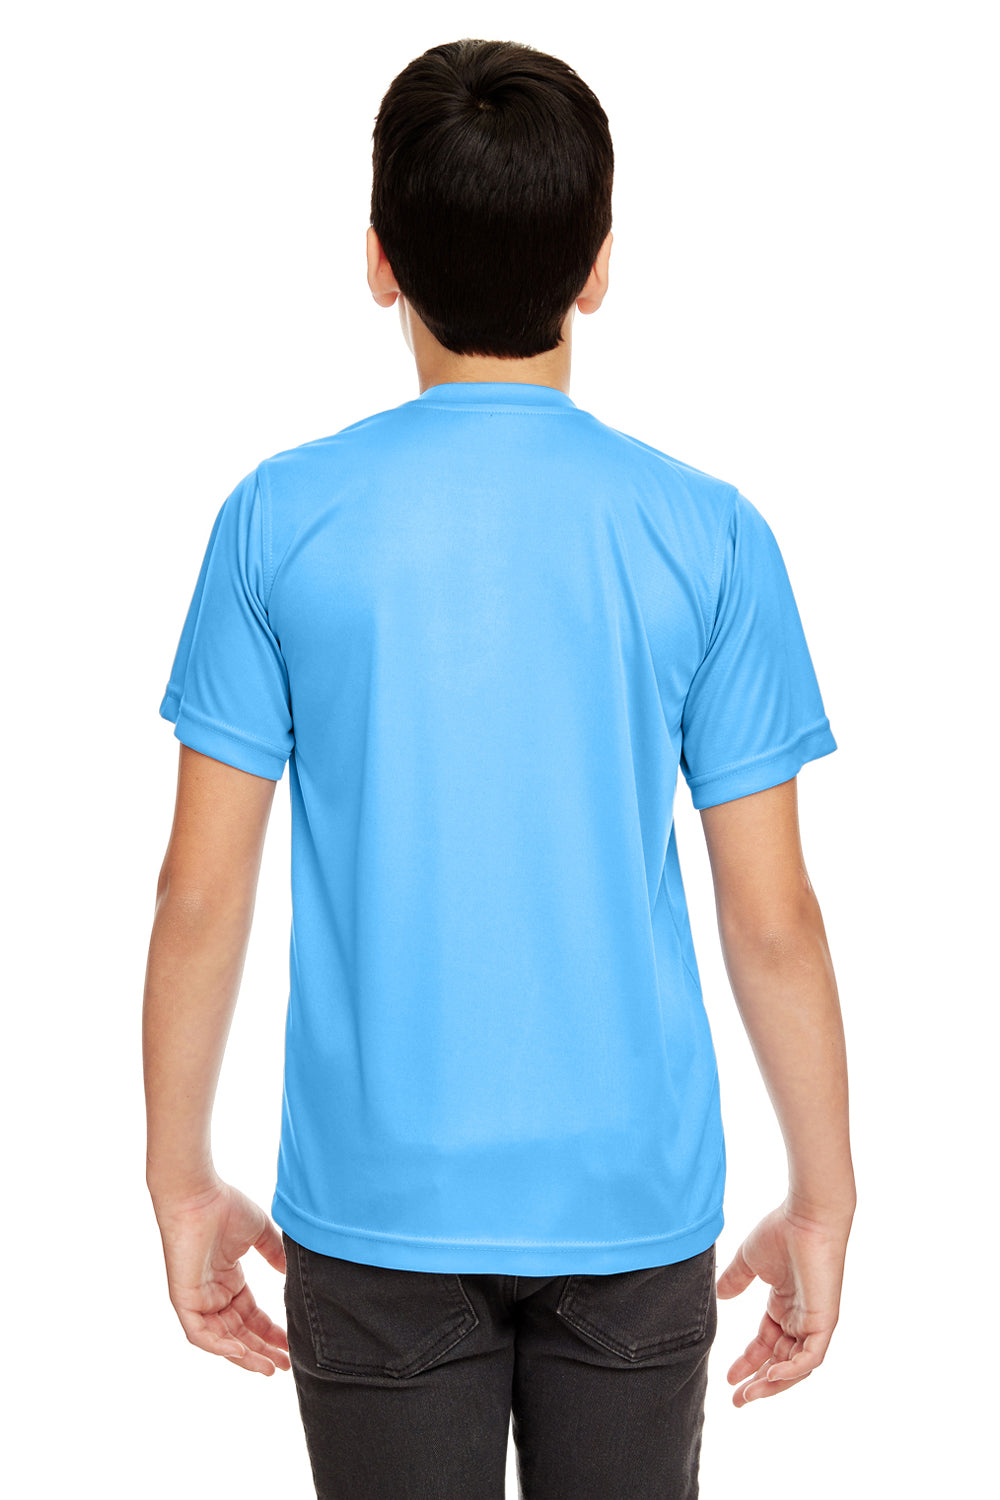 UltraClub 8420Y Youth Cool & Dry Performance Moisture Wicking Short Sleeve Crewneck T-Shirt Columbia Blue Back